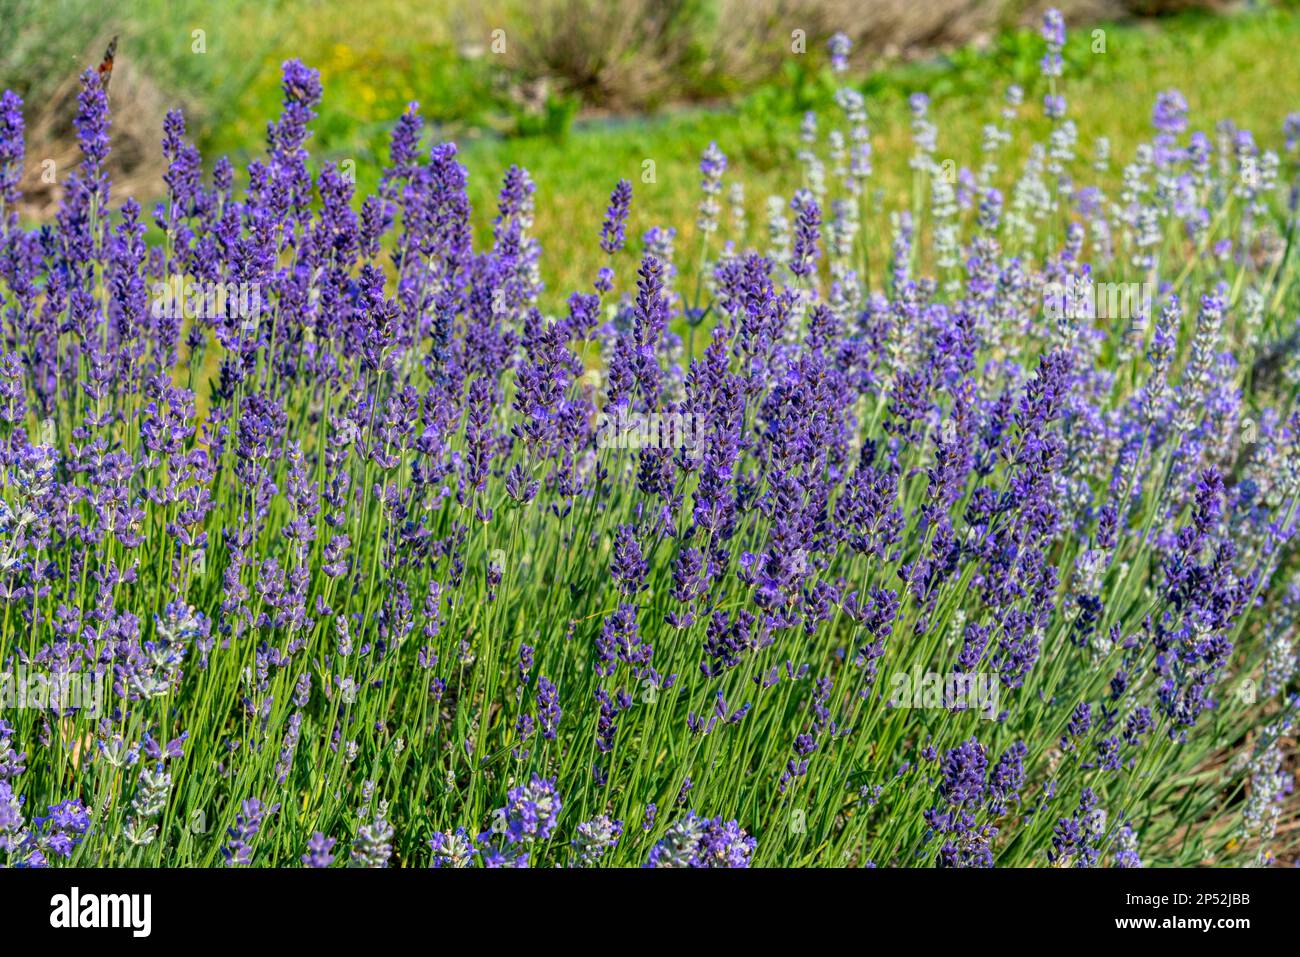 Purple flowering lavender in field on blurred background Stock Photo